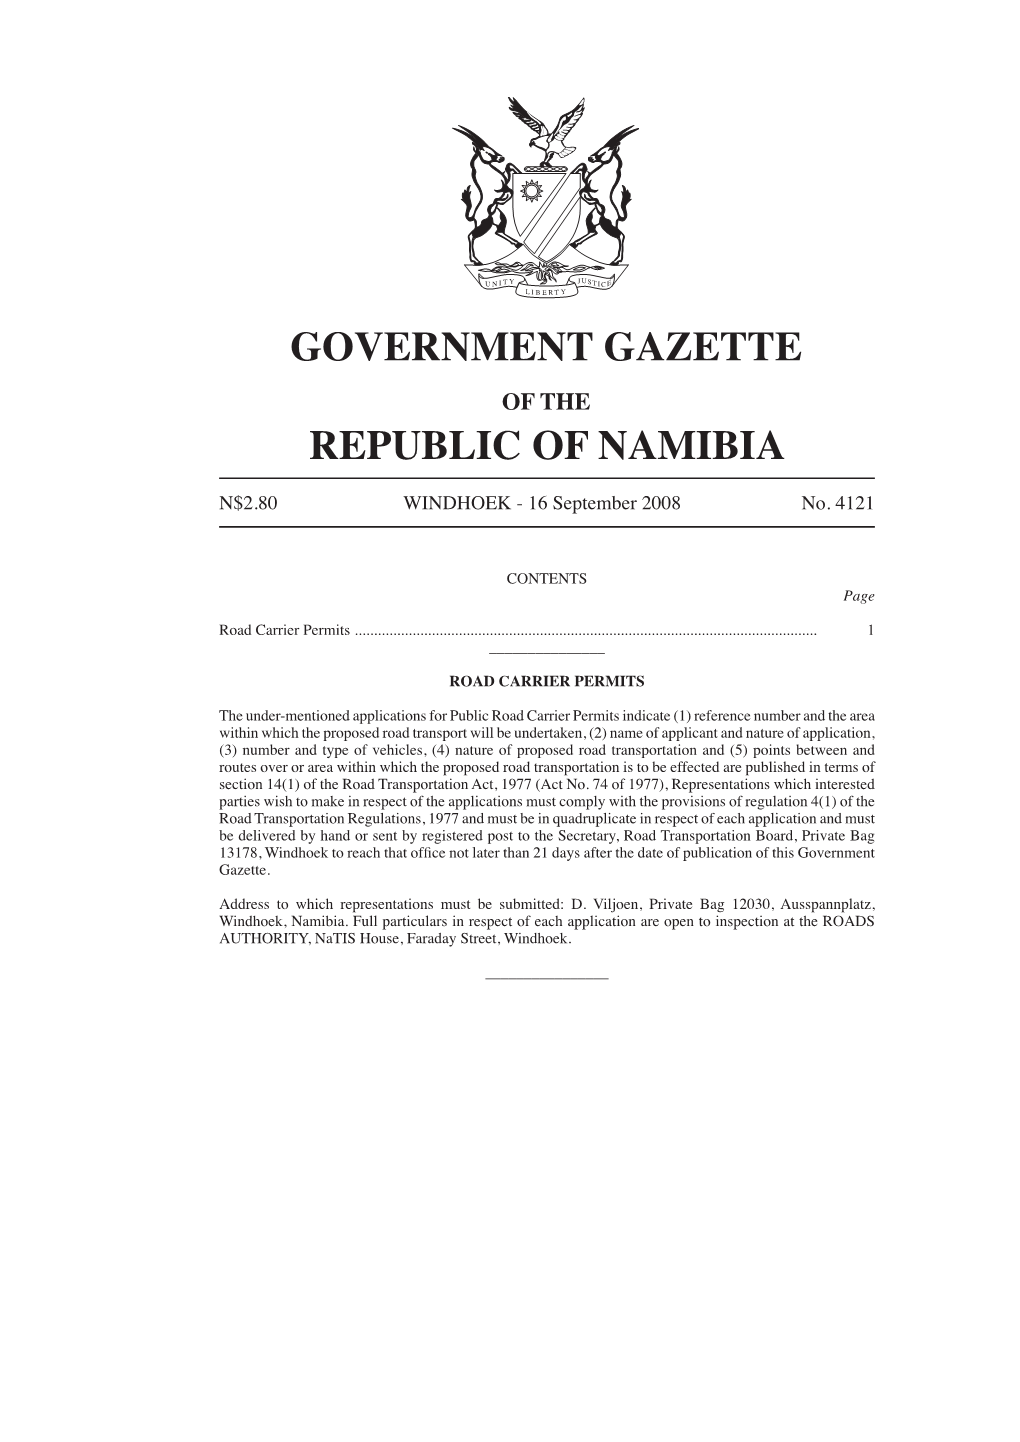 Government Gazette of the Republic of Namibia